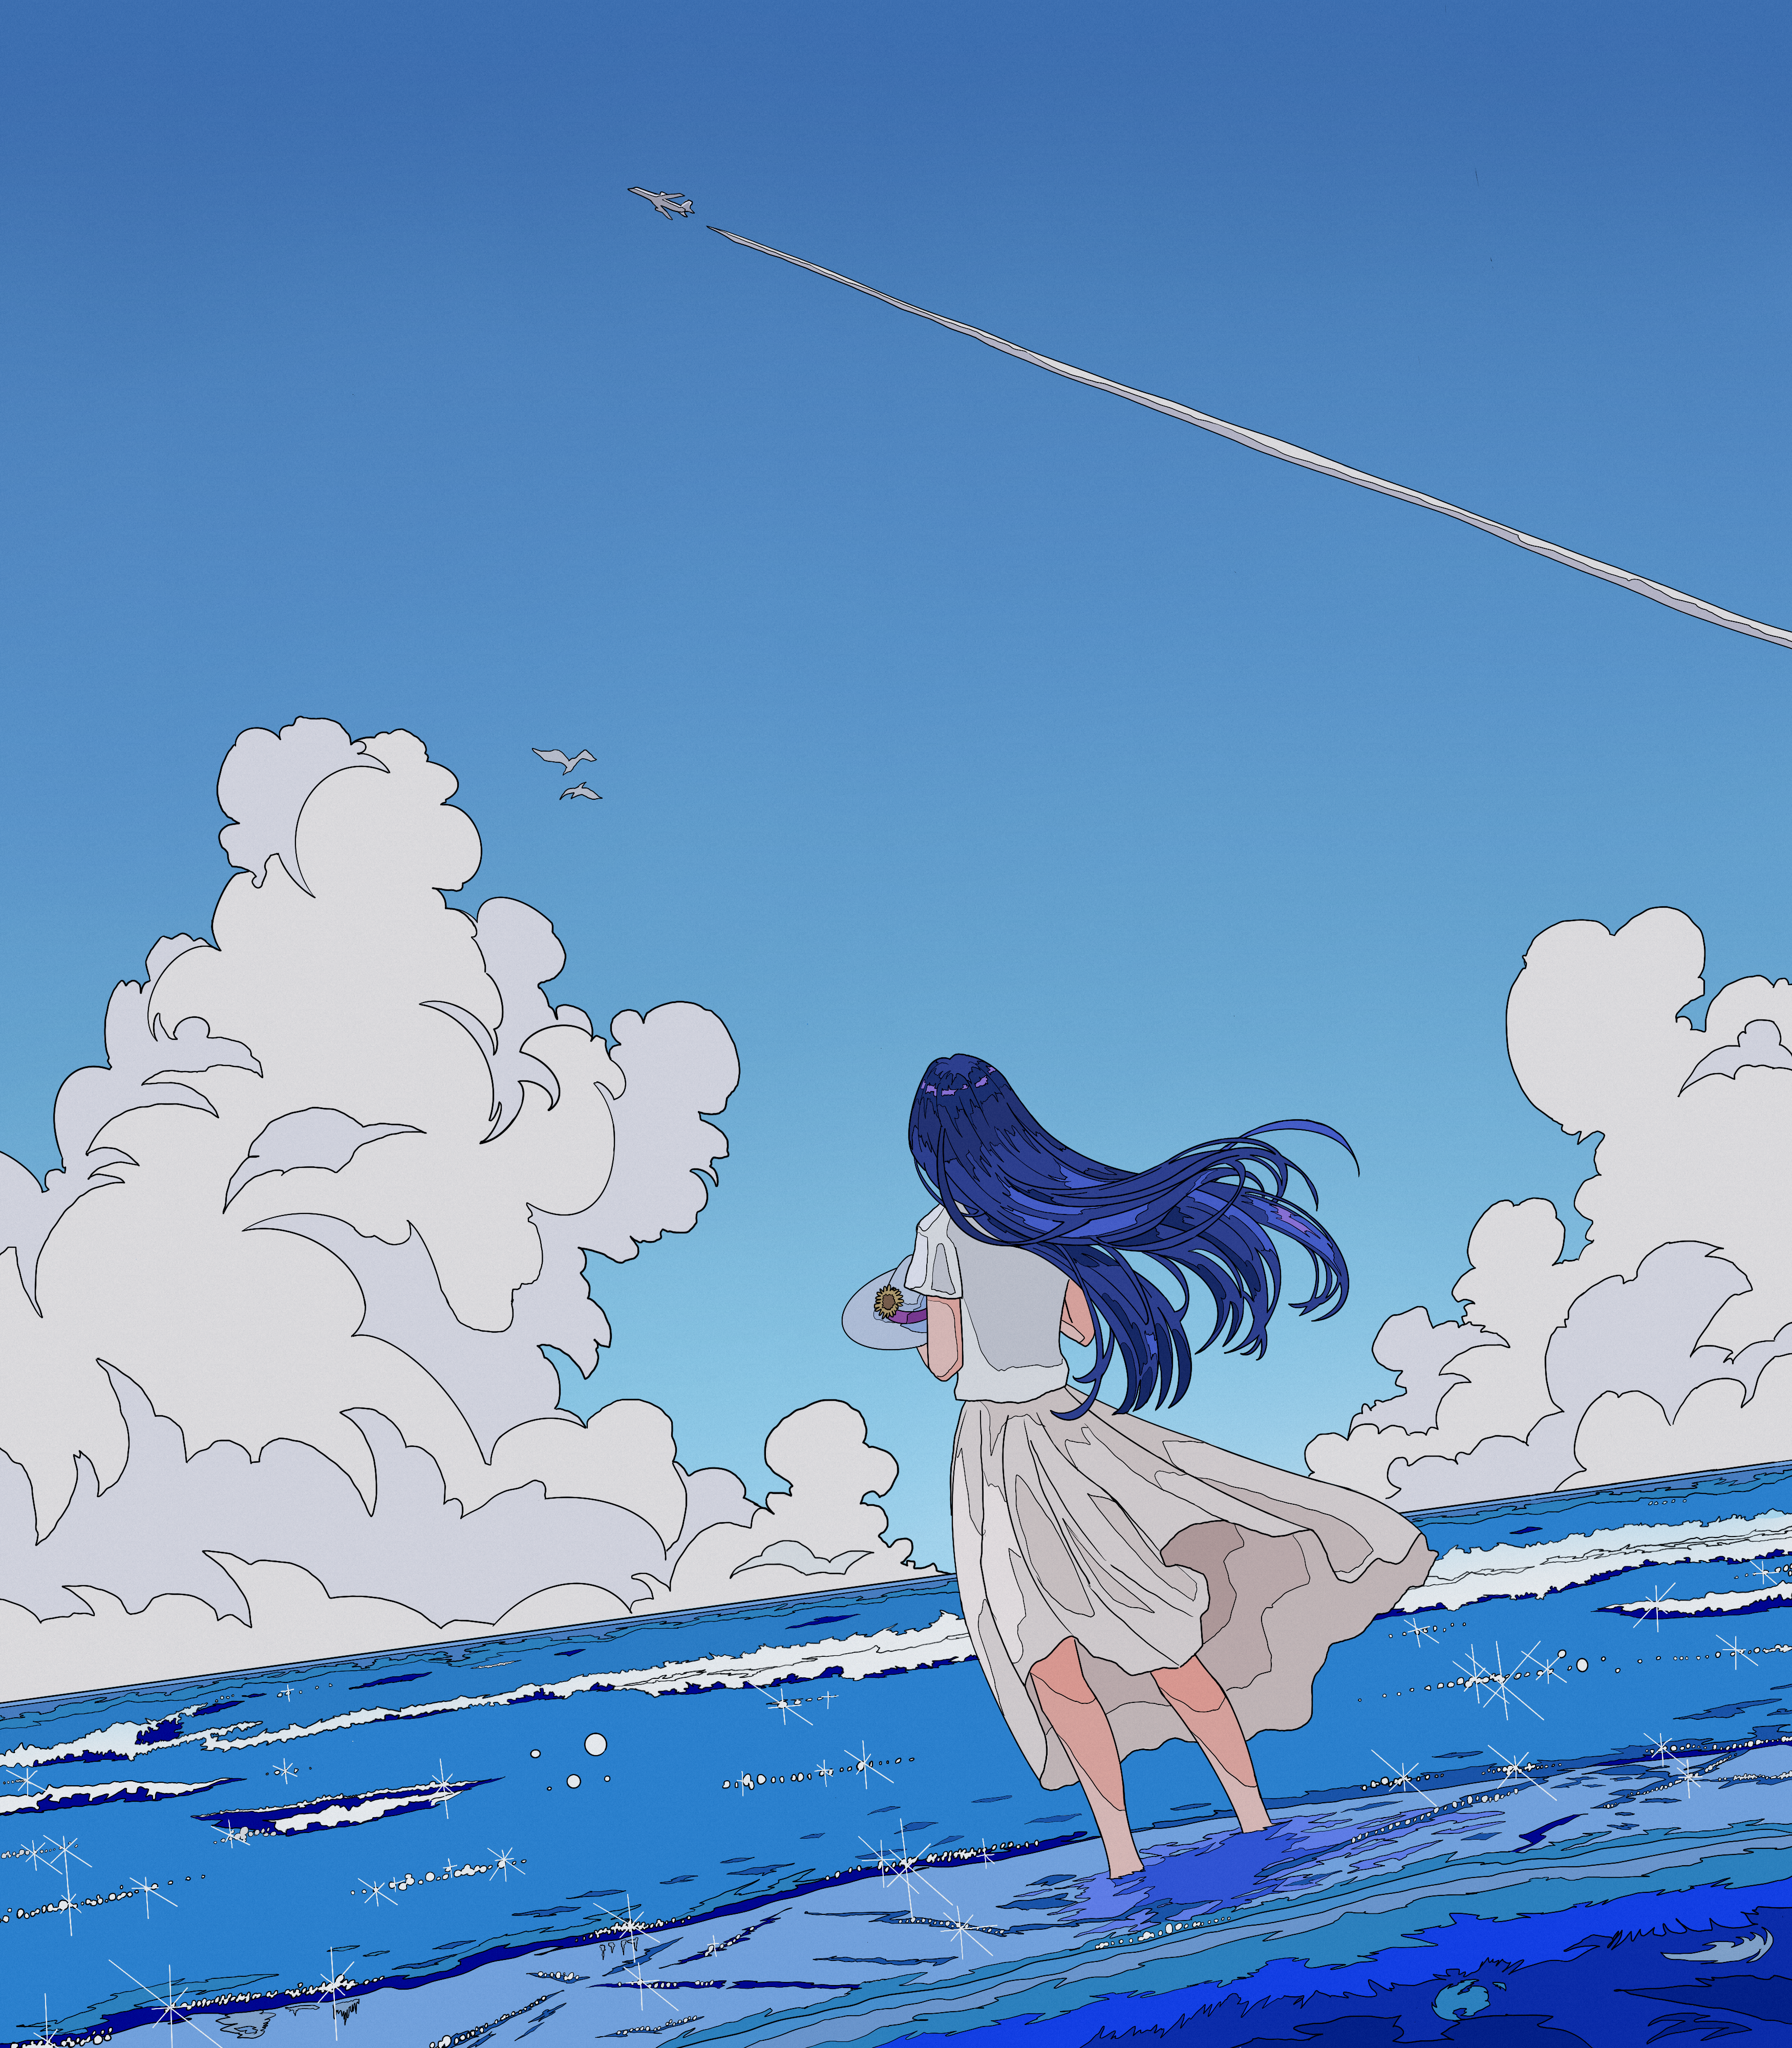 Anime 3500x4000 Umijin anime digital art artwork illustration environment landscape sea clouds dress anime girls women long hair blue hair airplane contrails blue portrait display sky water aircraft hair blowing in the wind